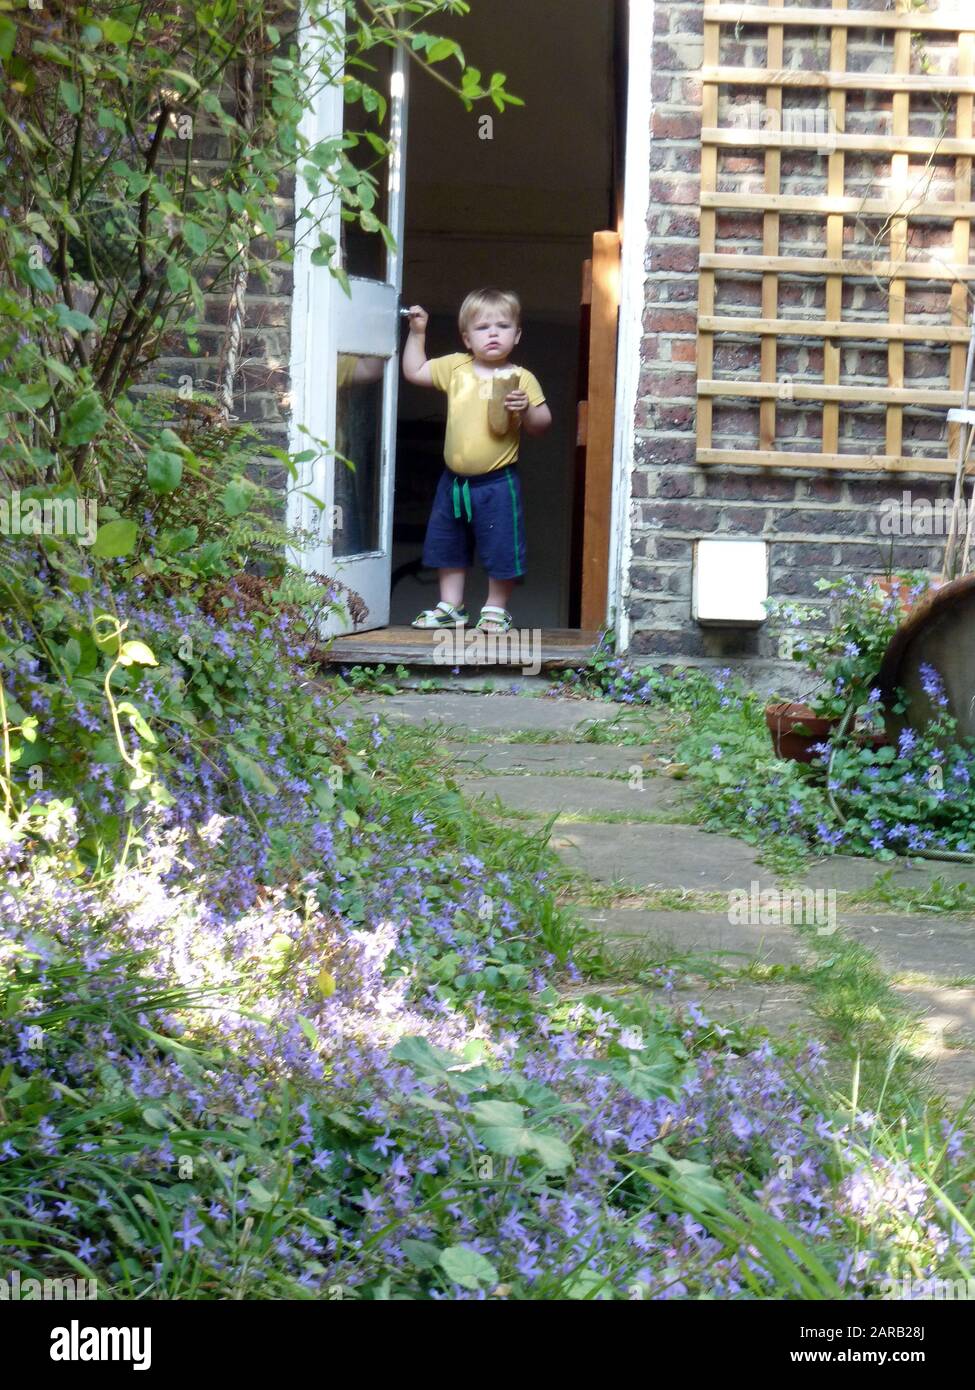 A toddler at an open door to the garden holding a loaf of bread Stock Photo